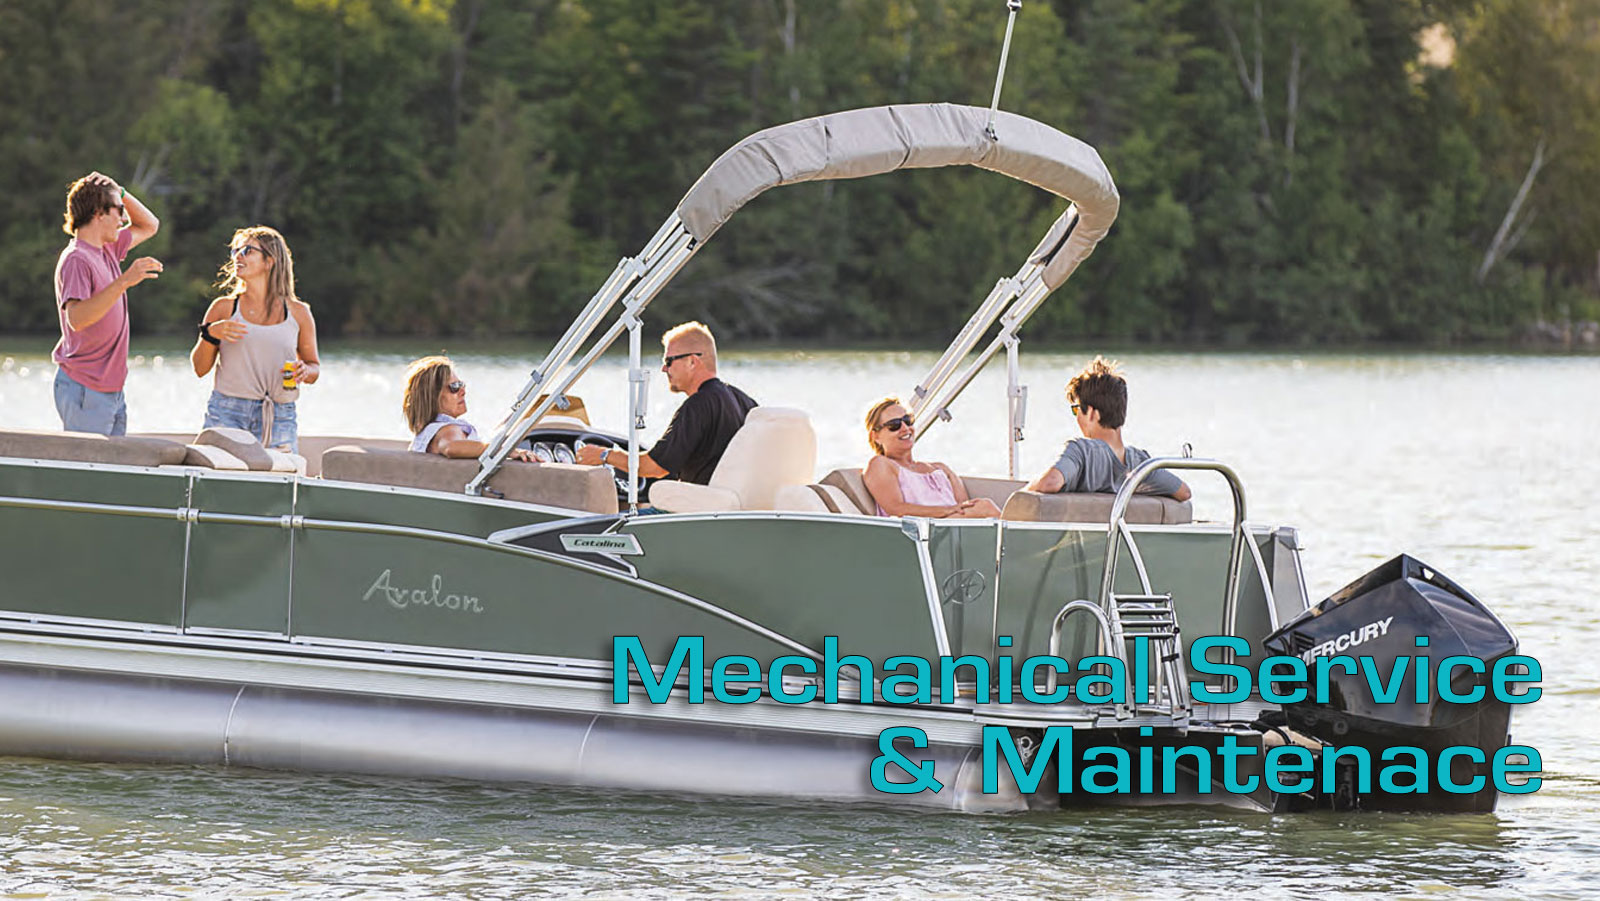 Mechanical Services for your boat and maintenance services for your boat